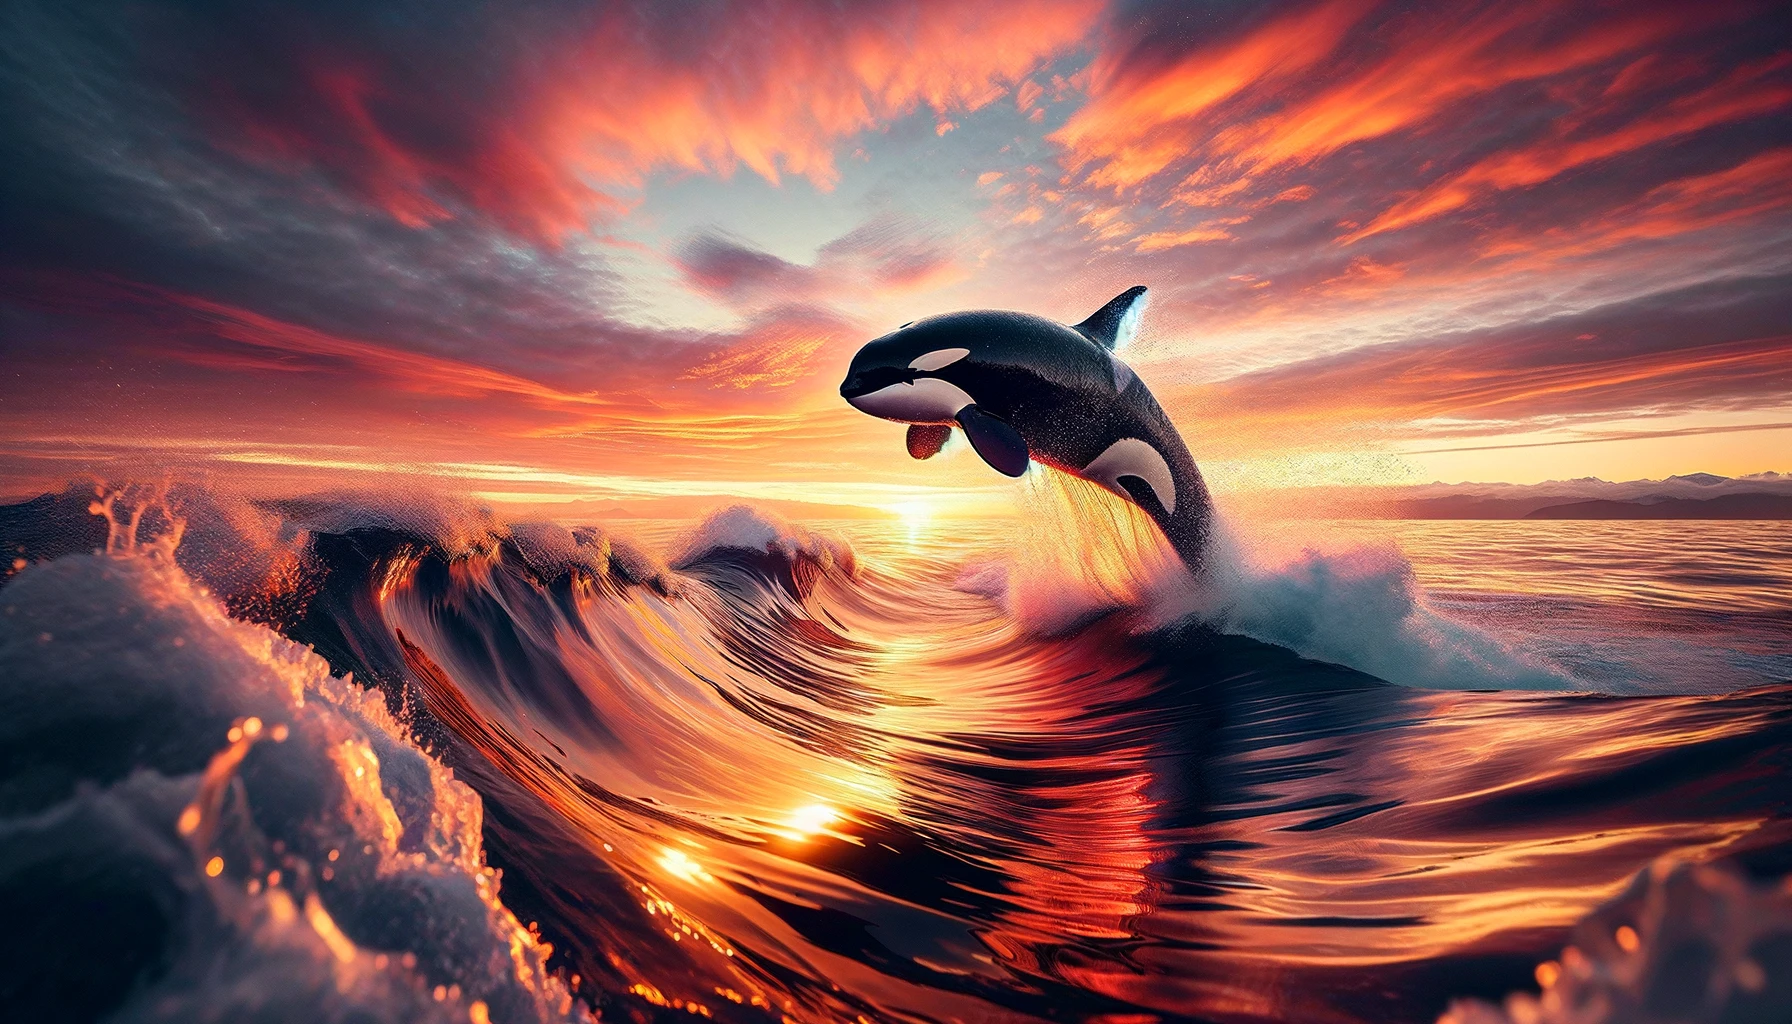 Orca jumping on the waves in a sunset.